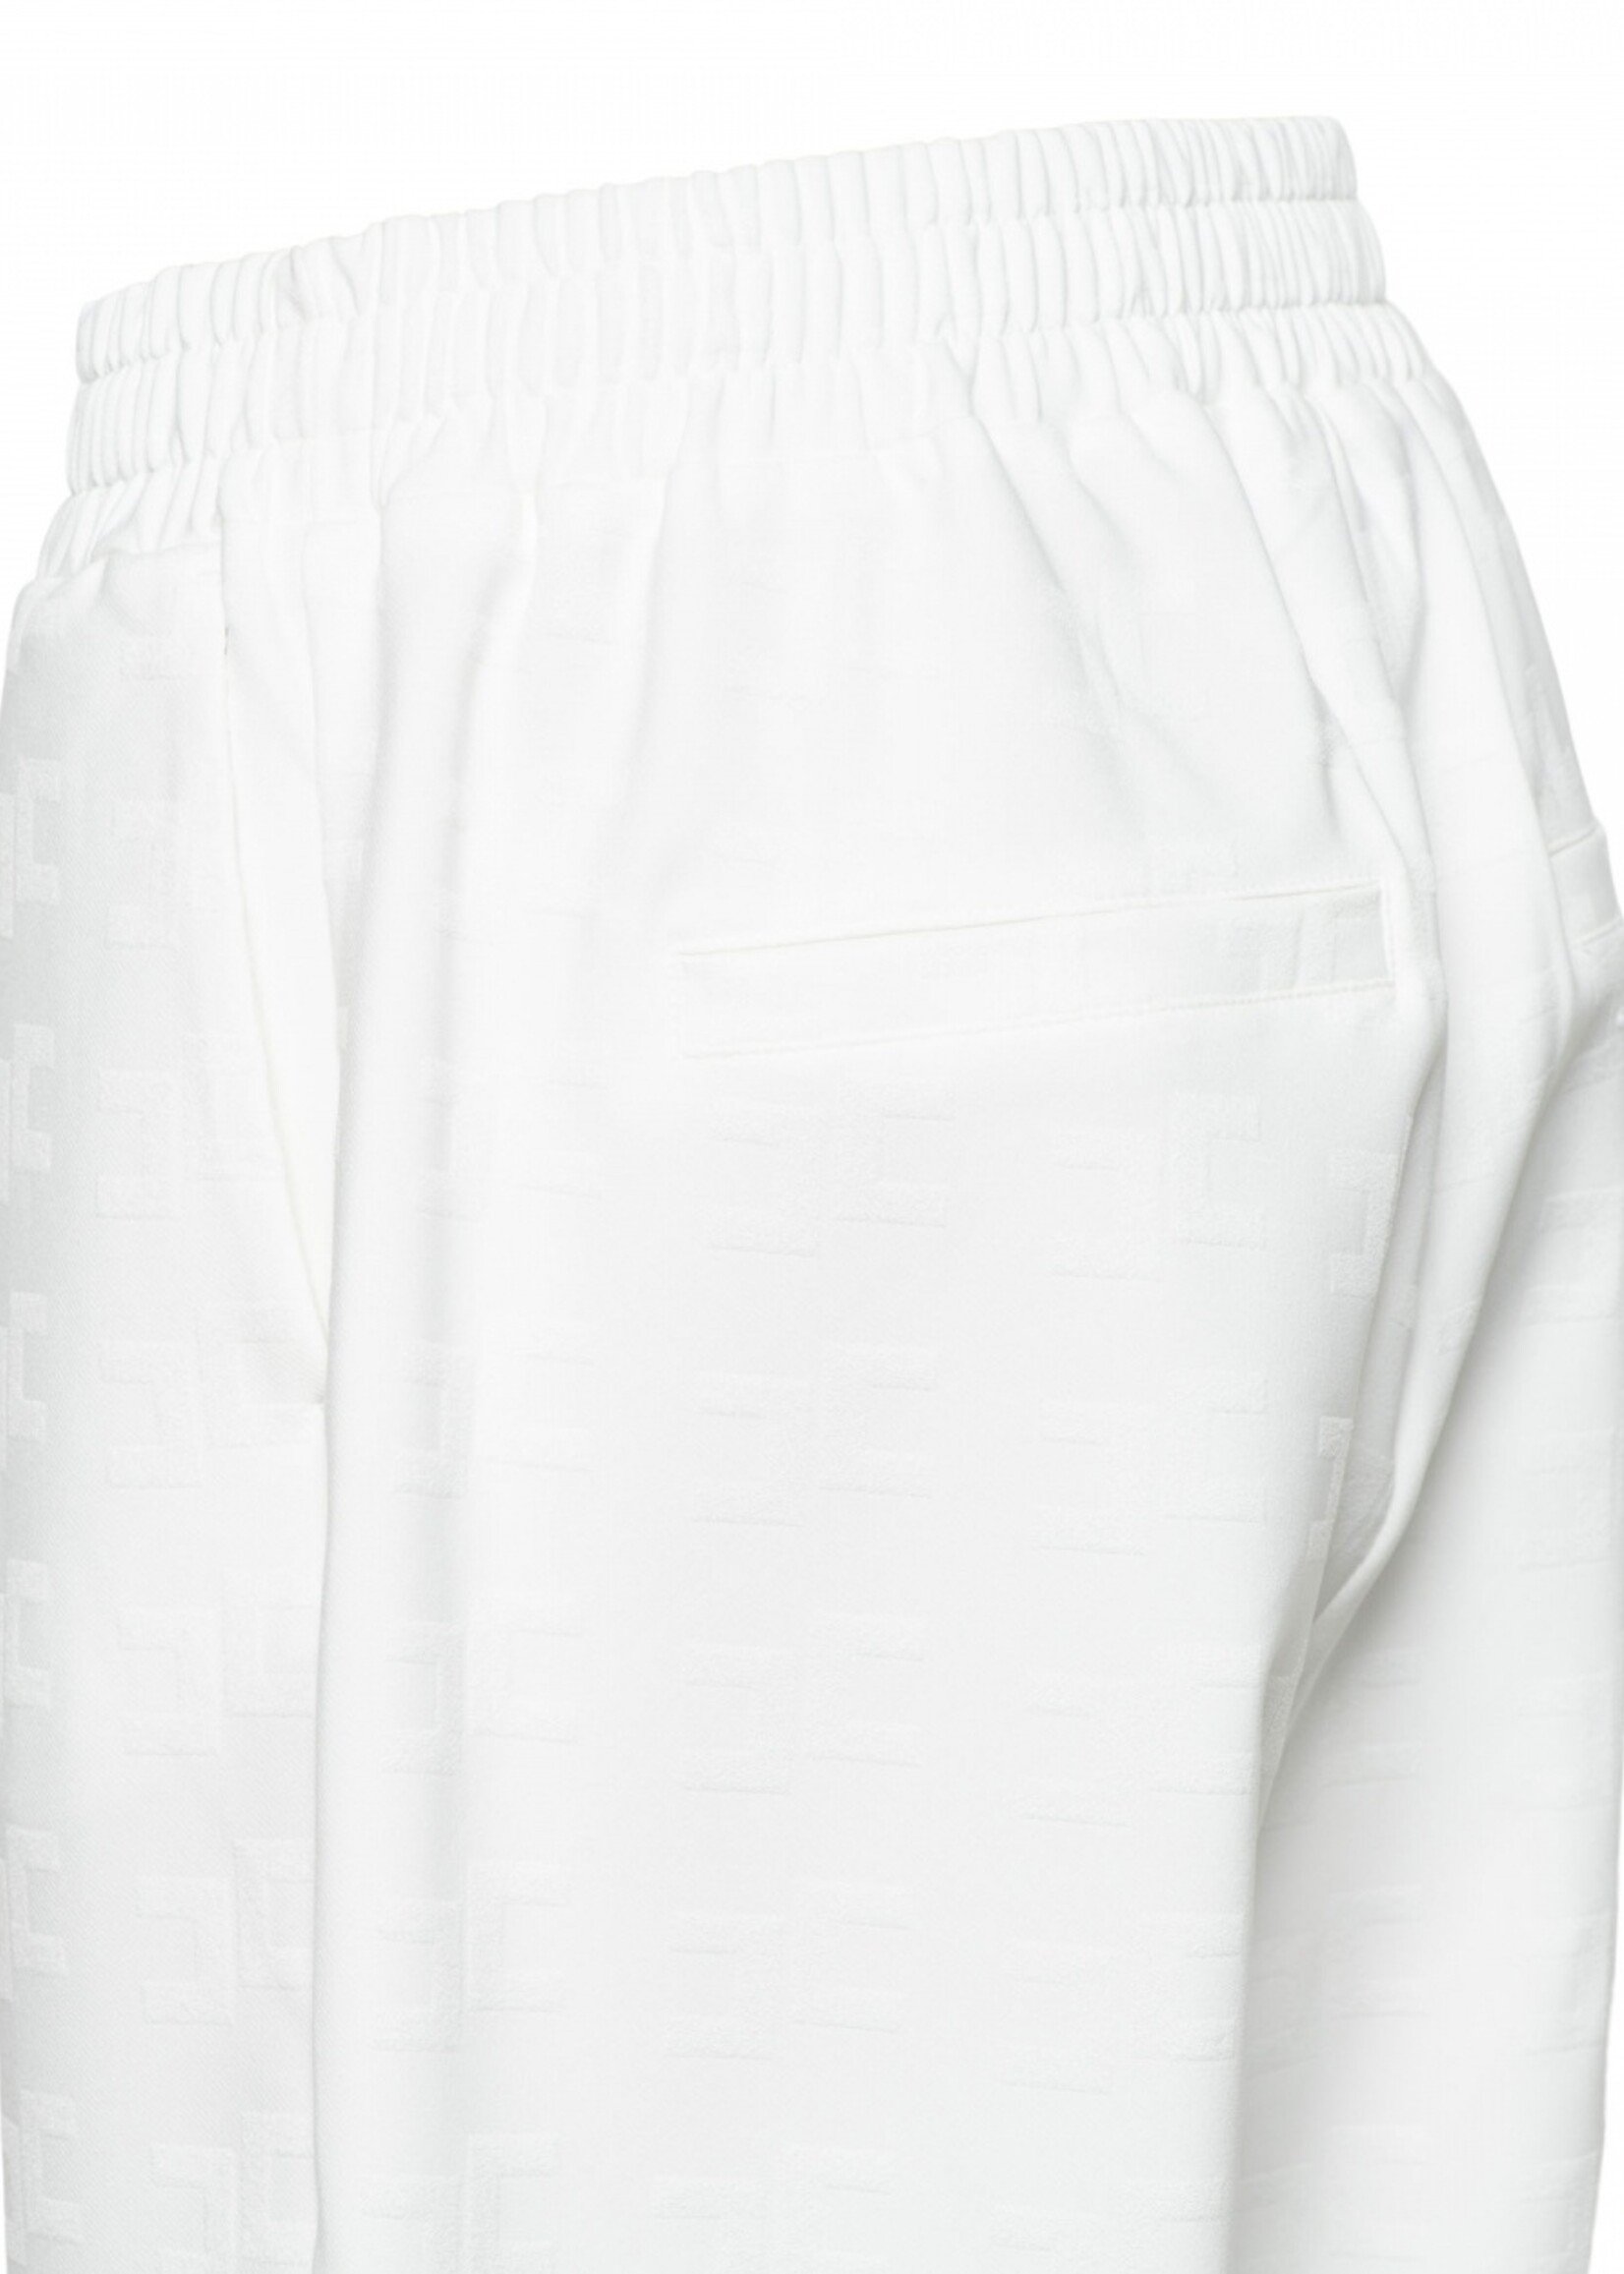 &Co woman Broek chrissy comfort offwhite pa293